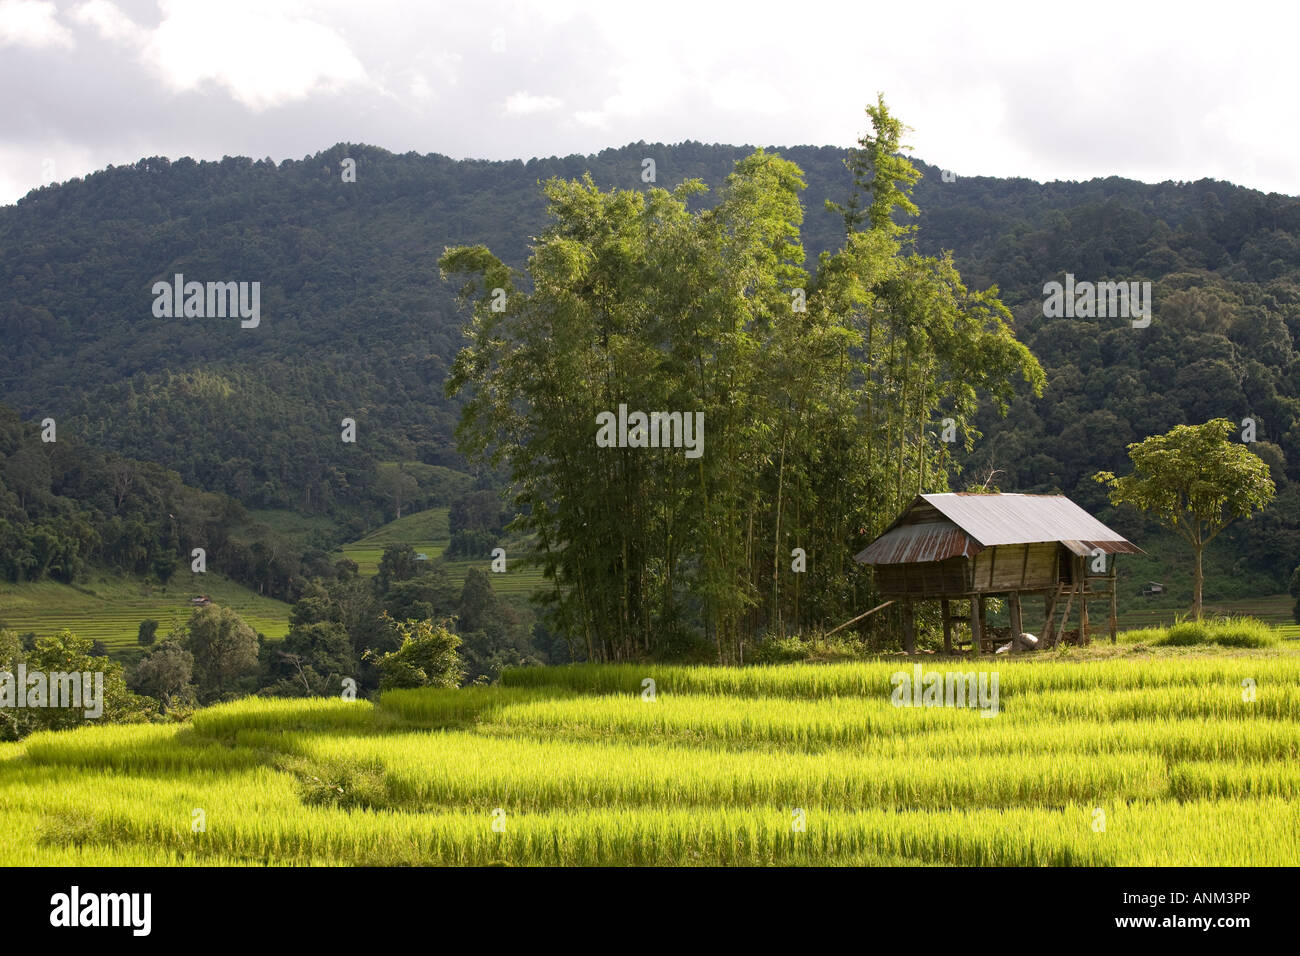 Growing Rice in Plantations,  Asia landscape of Terraced Rice Fields in  Chiang Mai, Thailand Stock Photo